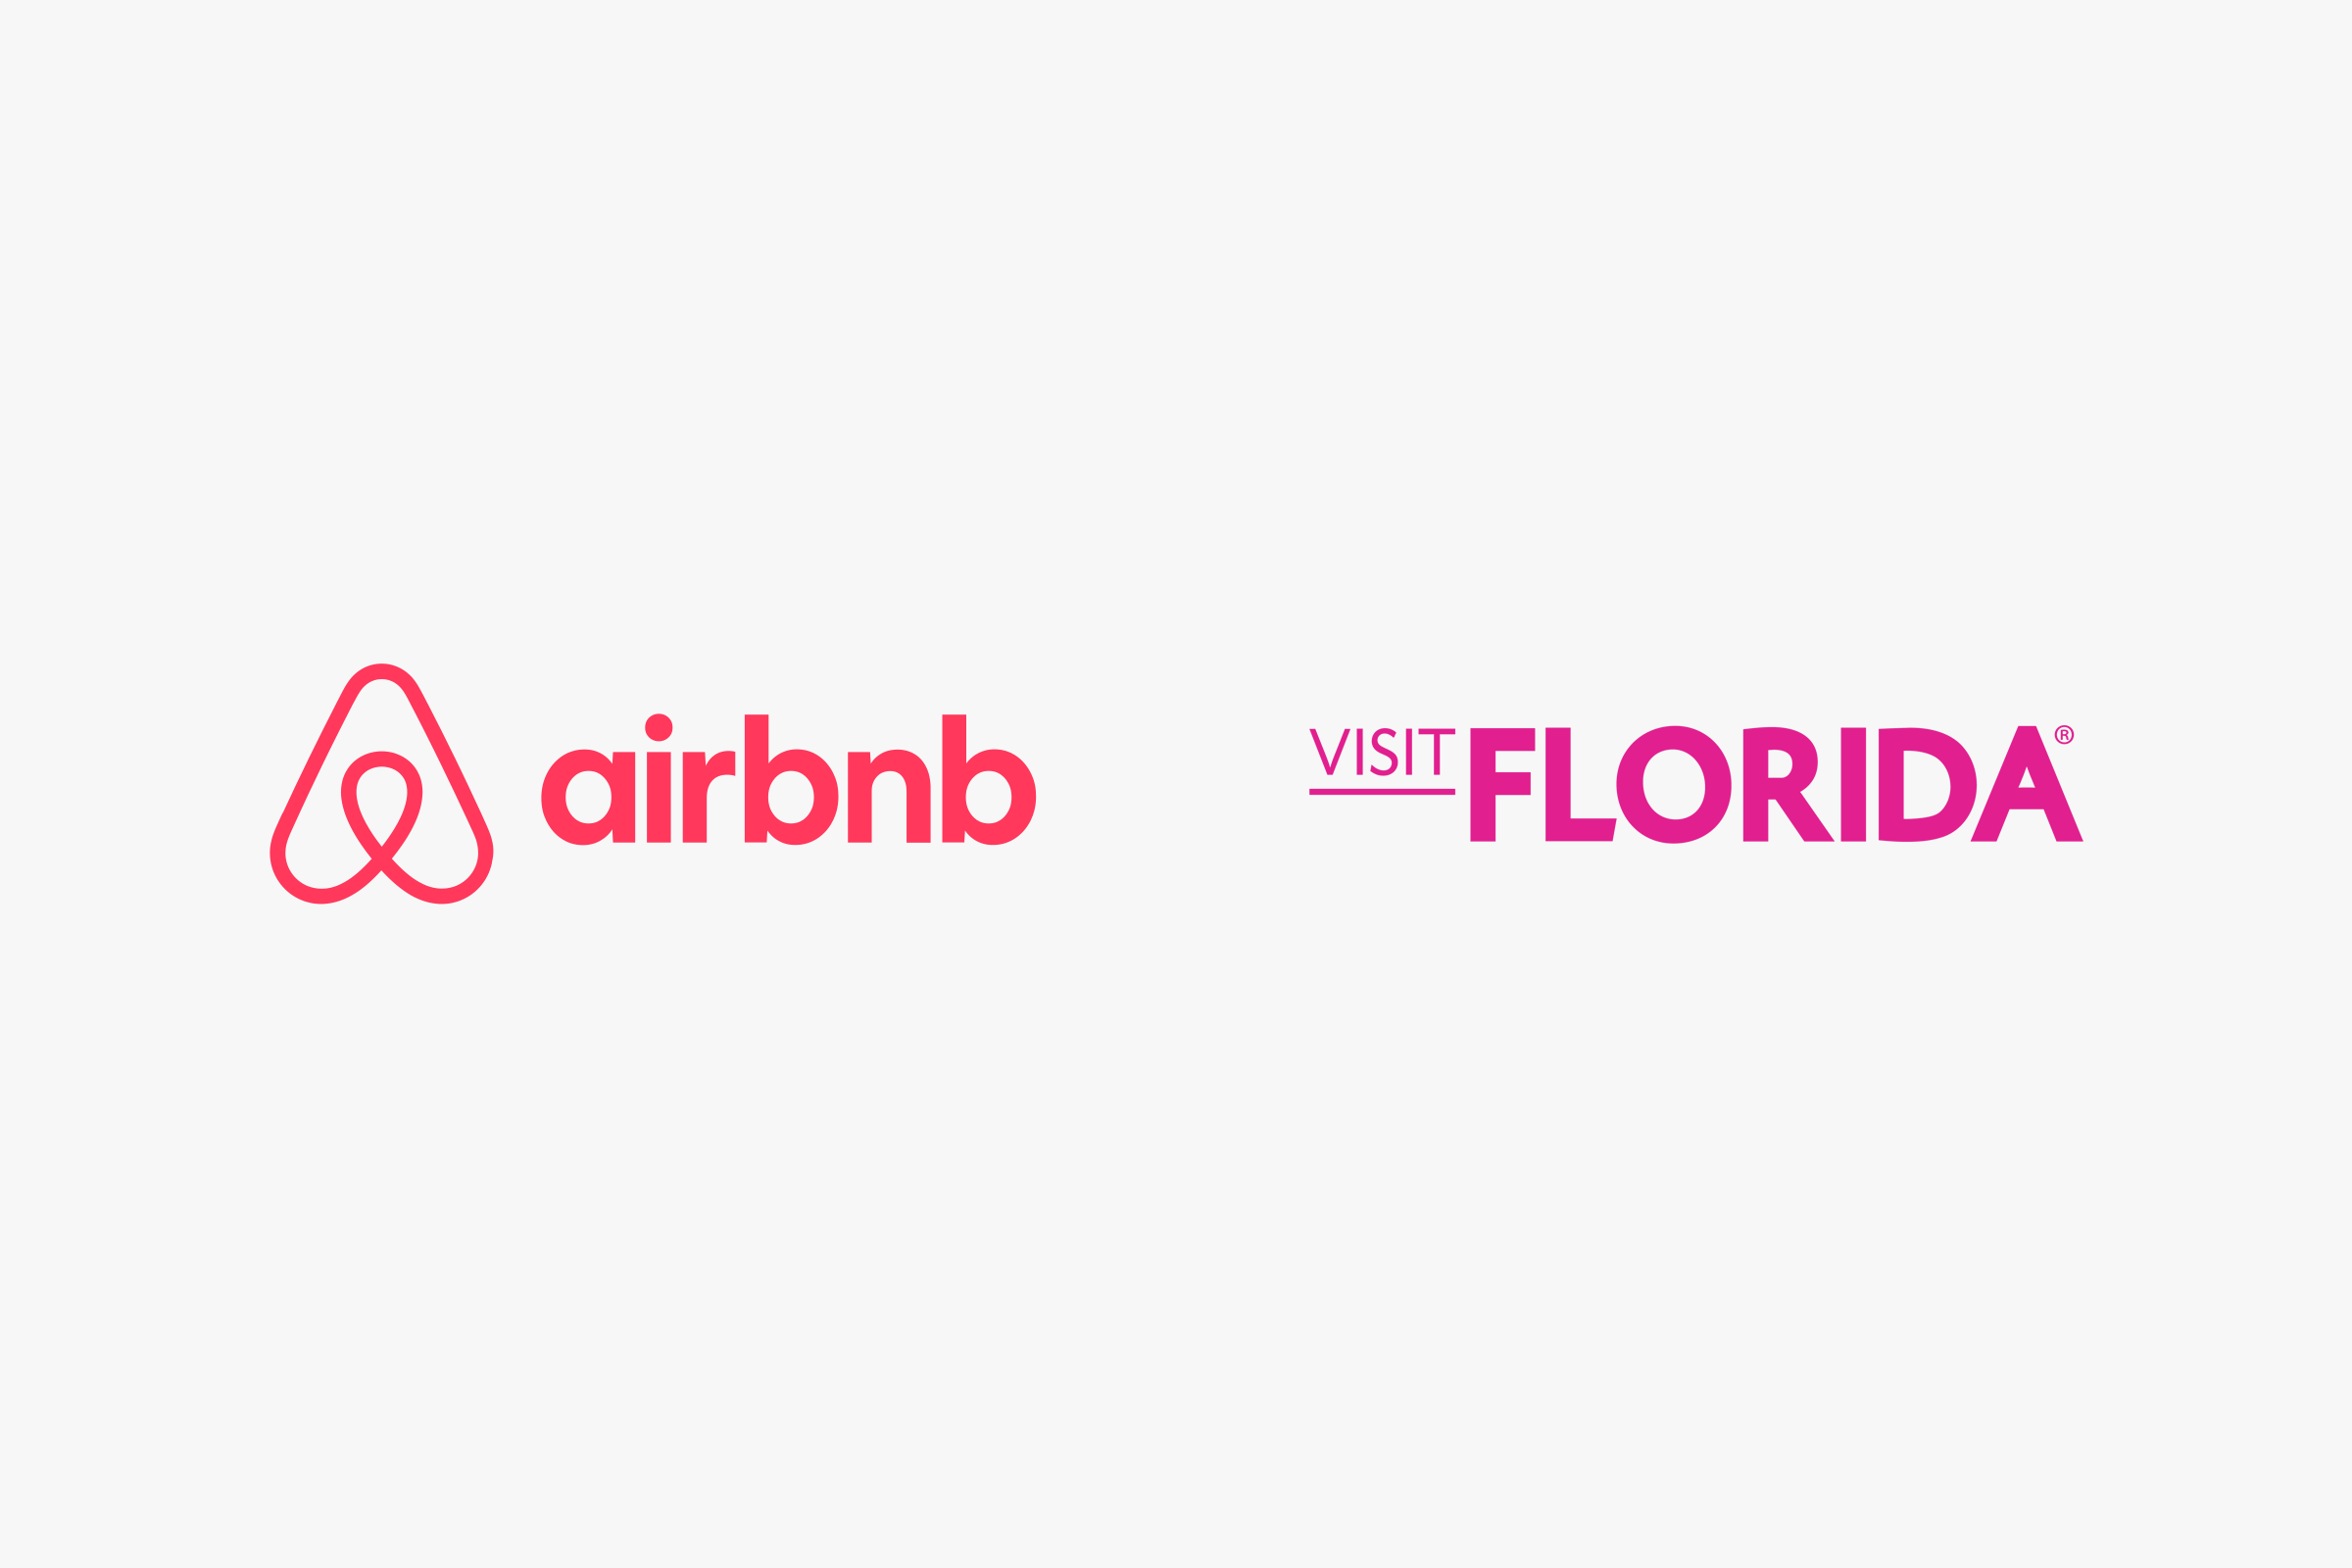 Airbnb logo and VISIT FLORIDA logo are pictured together.